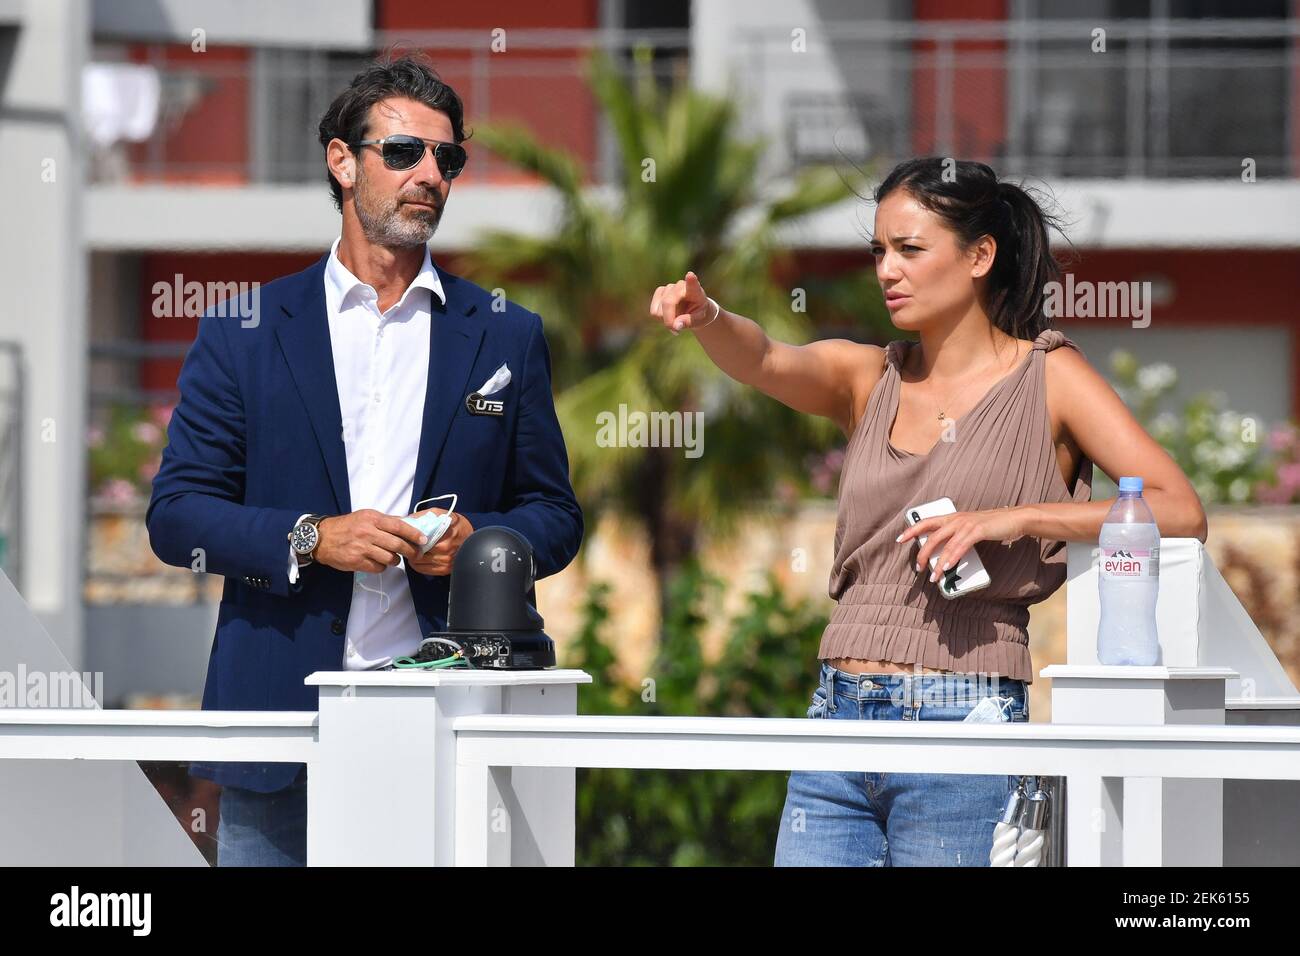 Patrick Mouratoglou and Alize Lim attends the Alexei Popyrin vs Elliot  Benchetrit at the Patrick Mouratoglou Academy, this Sunday, on June 14,  2020 his big idea: the Ultimate tennis showdown (UTS). A